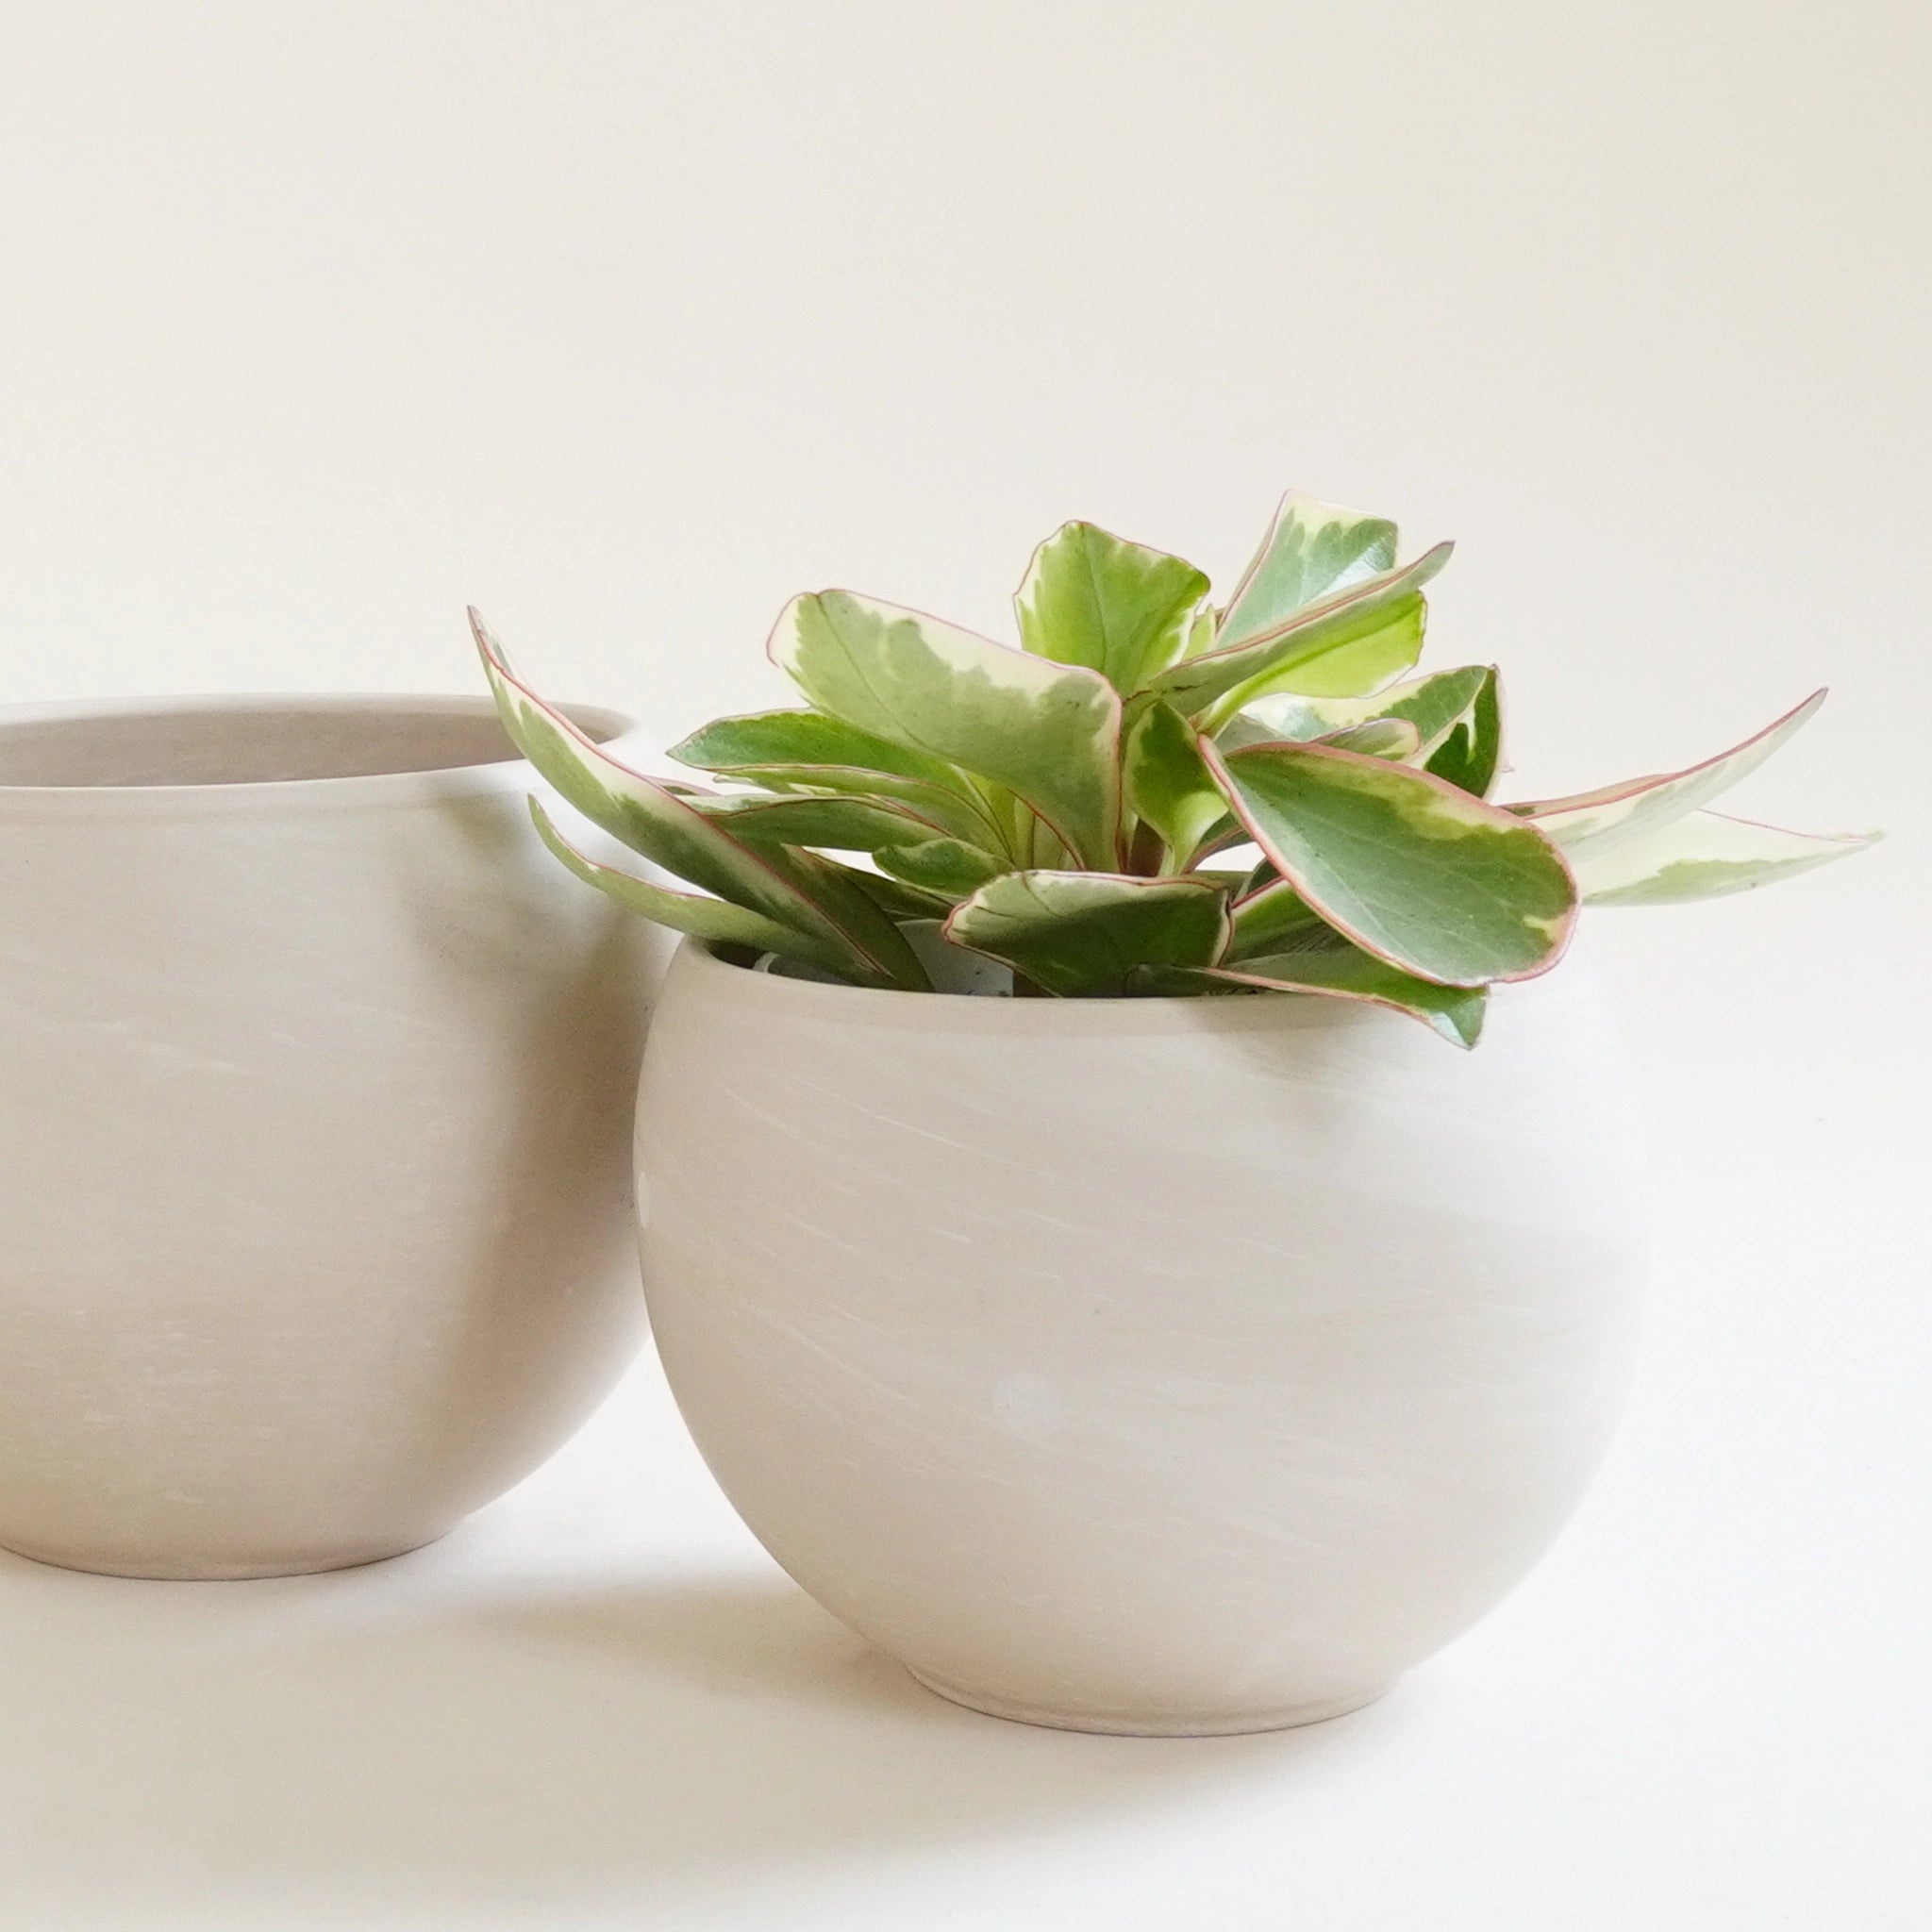 Two round tall bowl shaped beige colored pots, one is slightly larger than the other, and one is holding a small leafy house plant with light and dark green leaves.